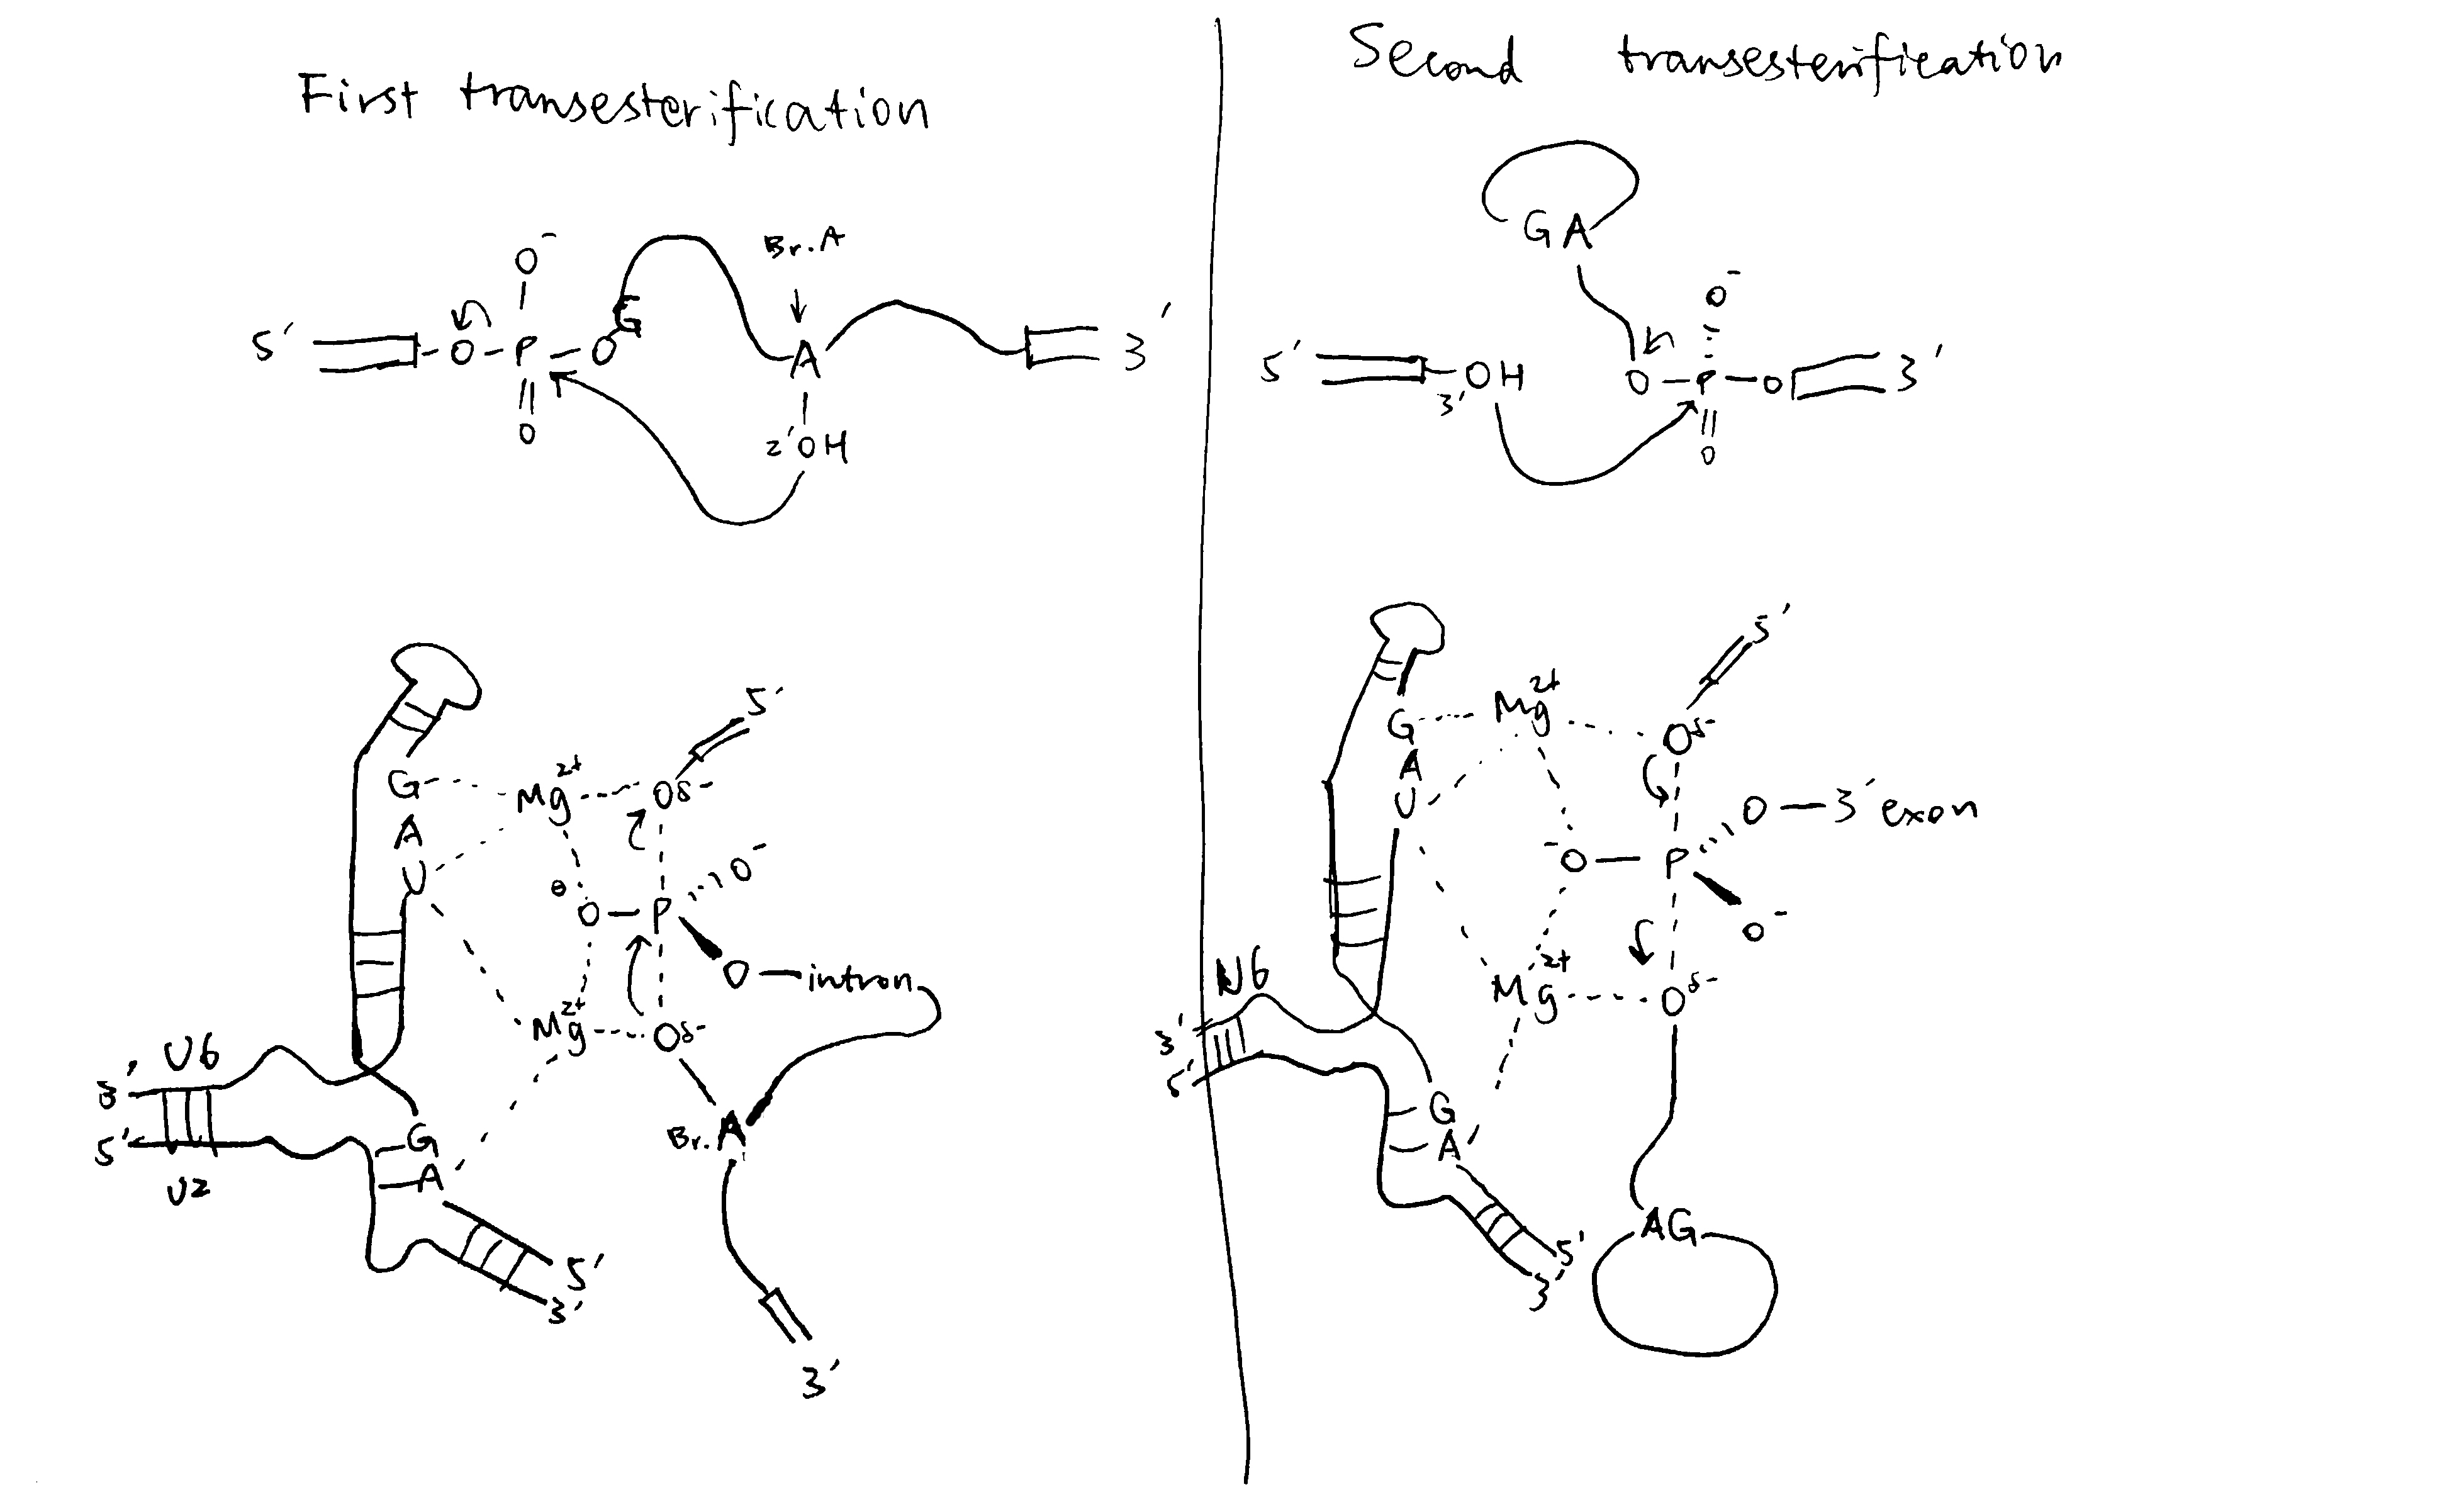 The transesterification reactions in detail